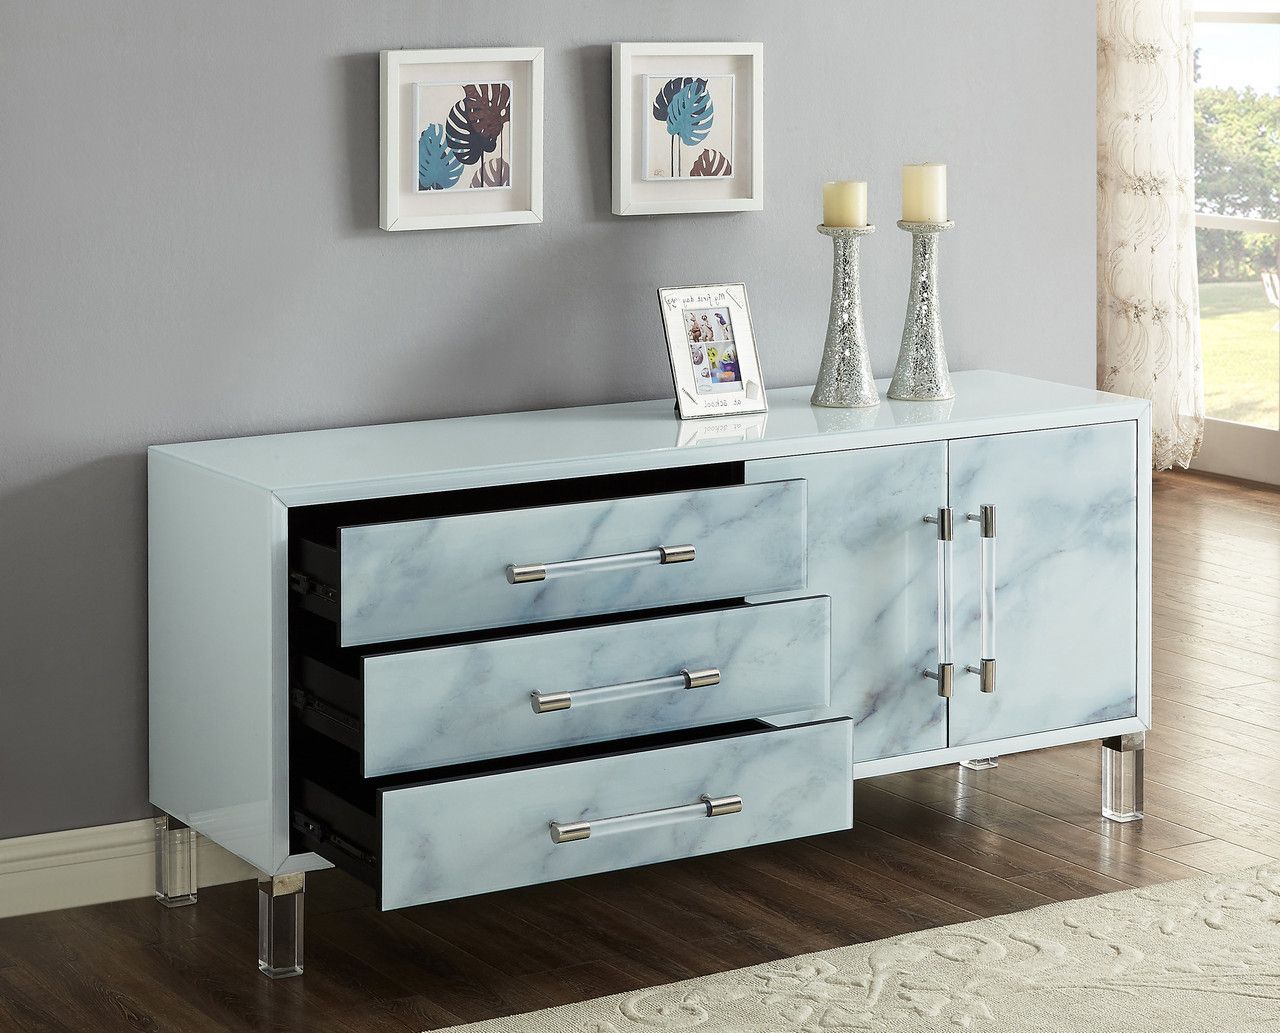 Latest Sloane Contemporary Glass Marble Carrera Sideboard With Acrylic Handles In Modern Sideboards (View 16 of 18)